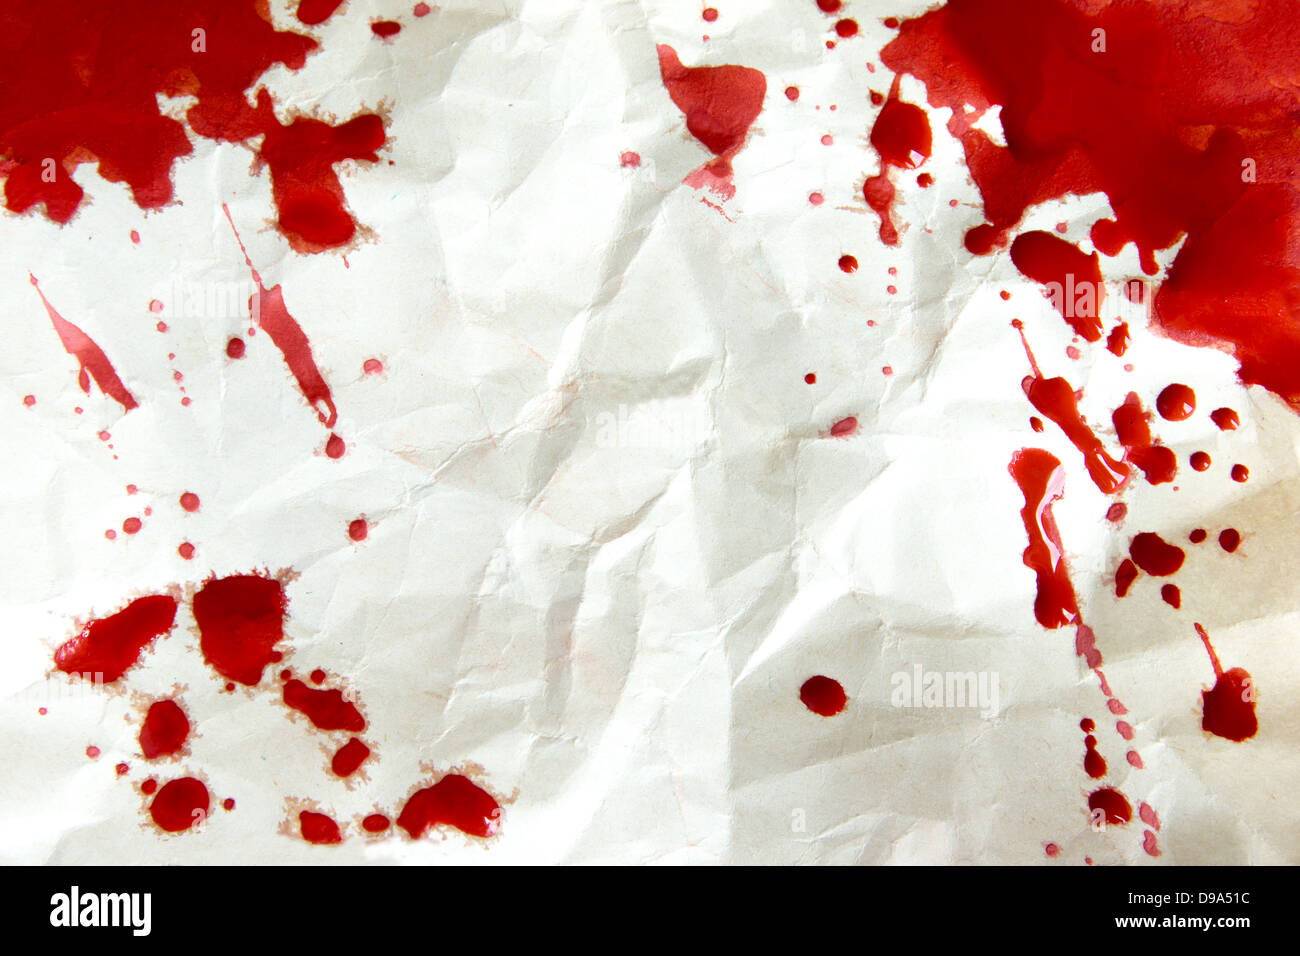 Crumpled old paper texture with blood splatter (stains, droplets) frame close up, horizontal, blank, copy space Stock Photo